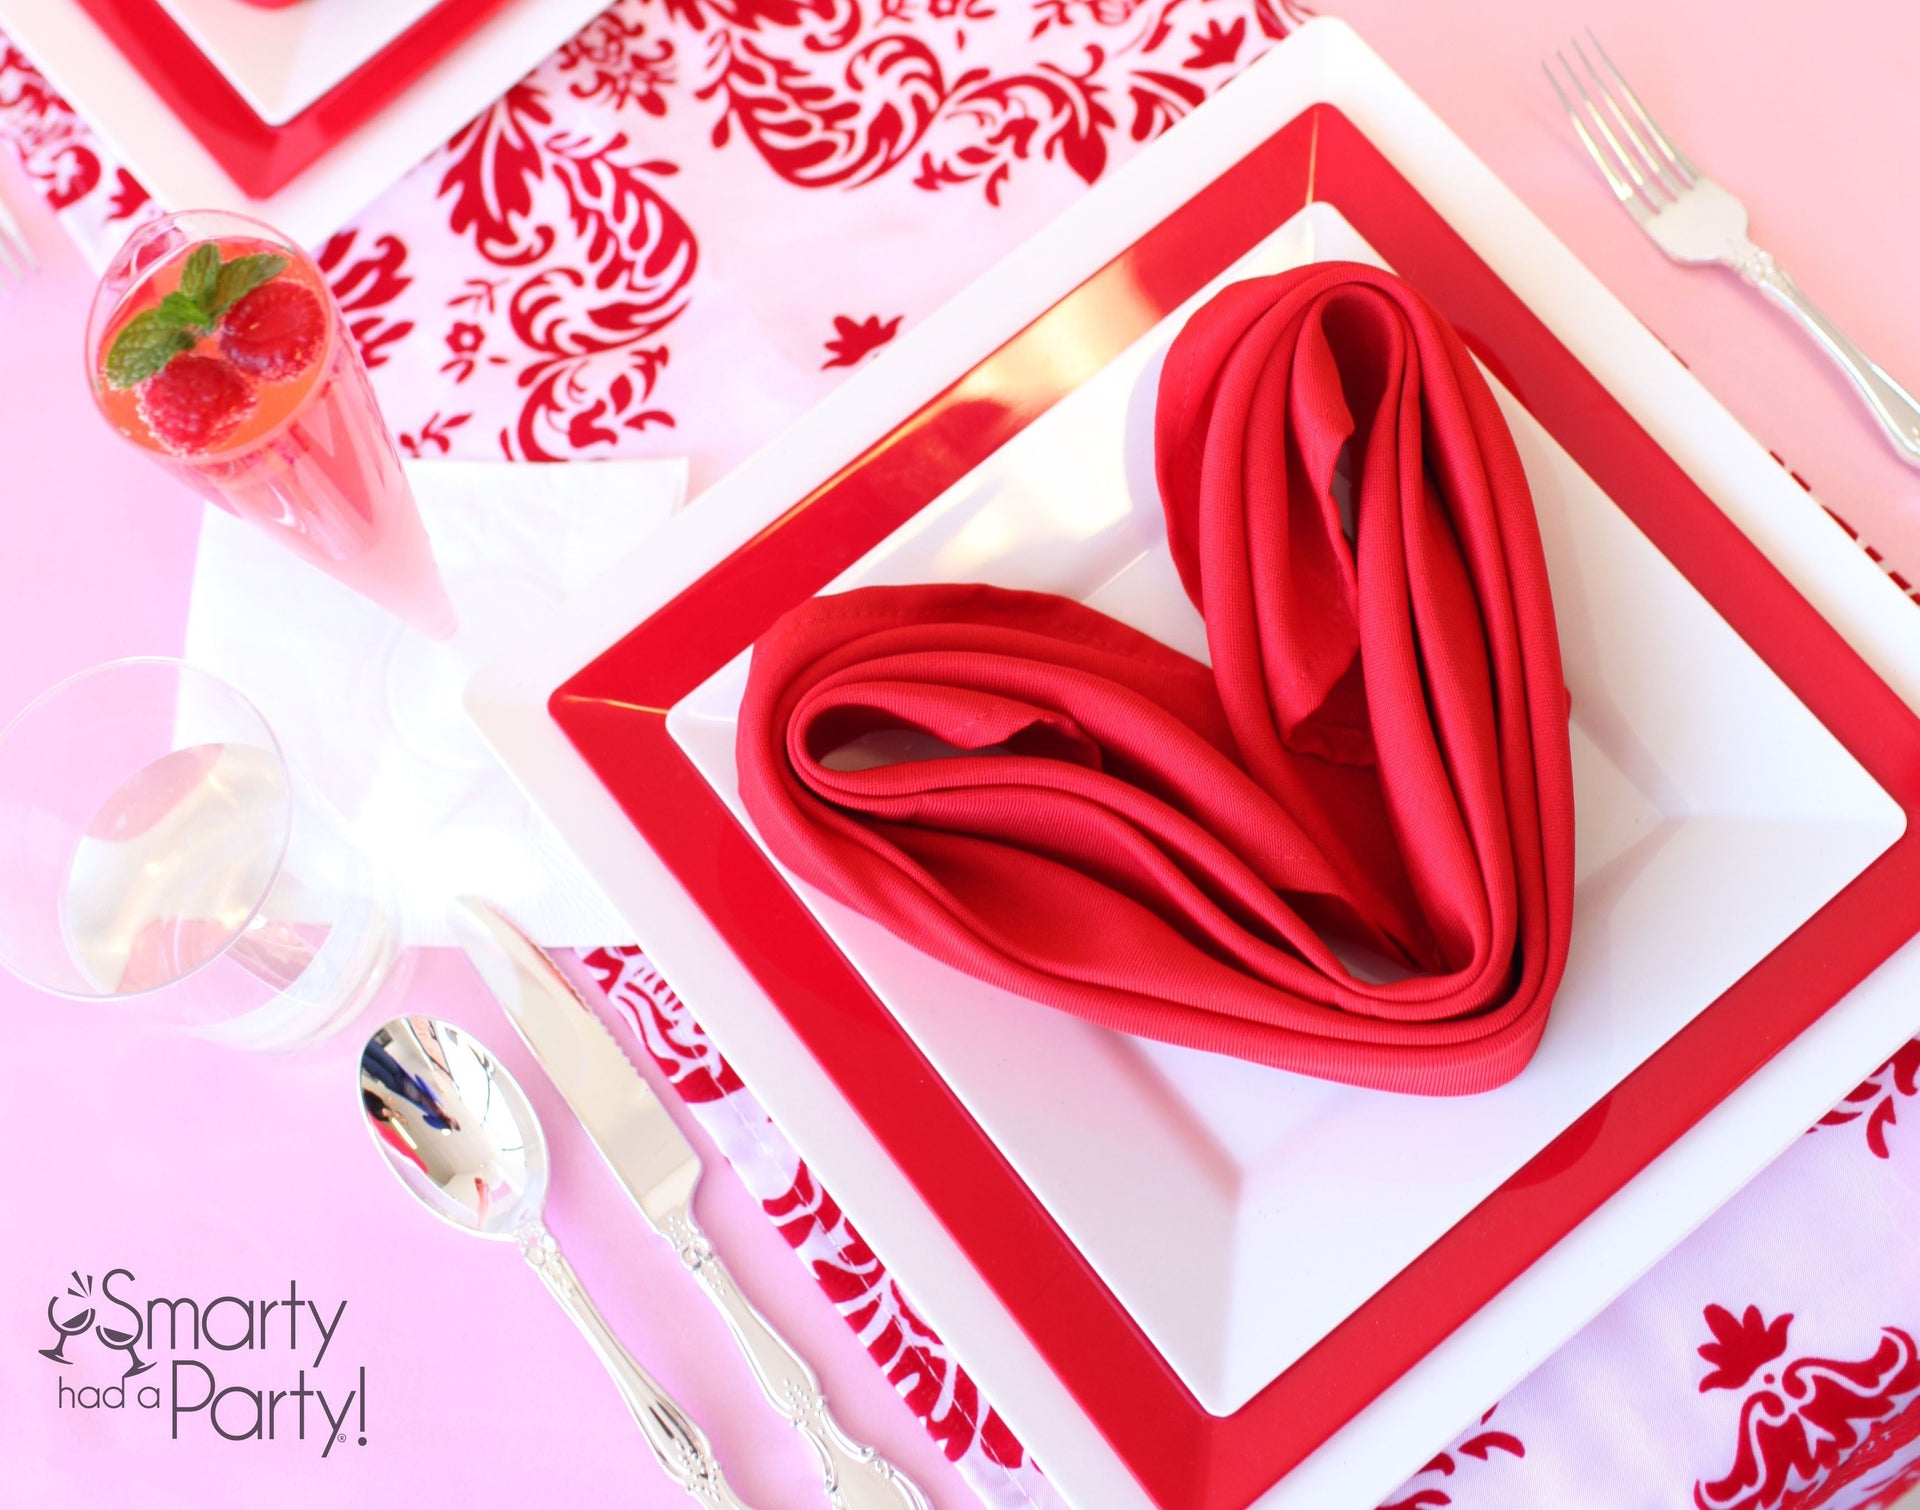 How to Plan a Lovely Valentine’s Day Dinner at Home?